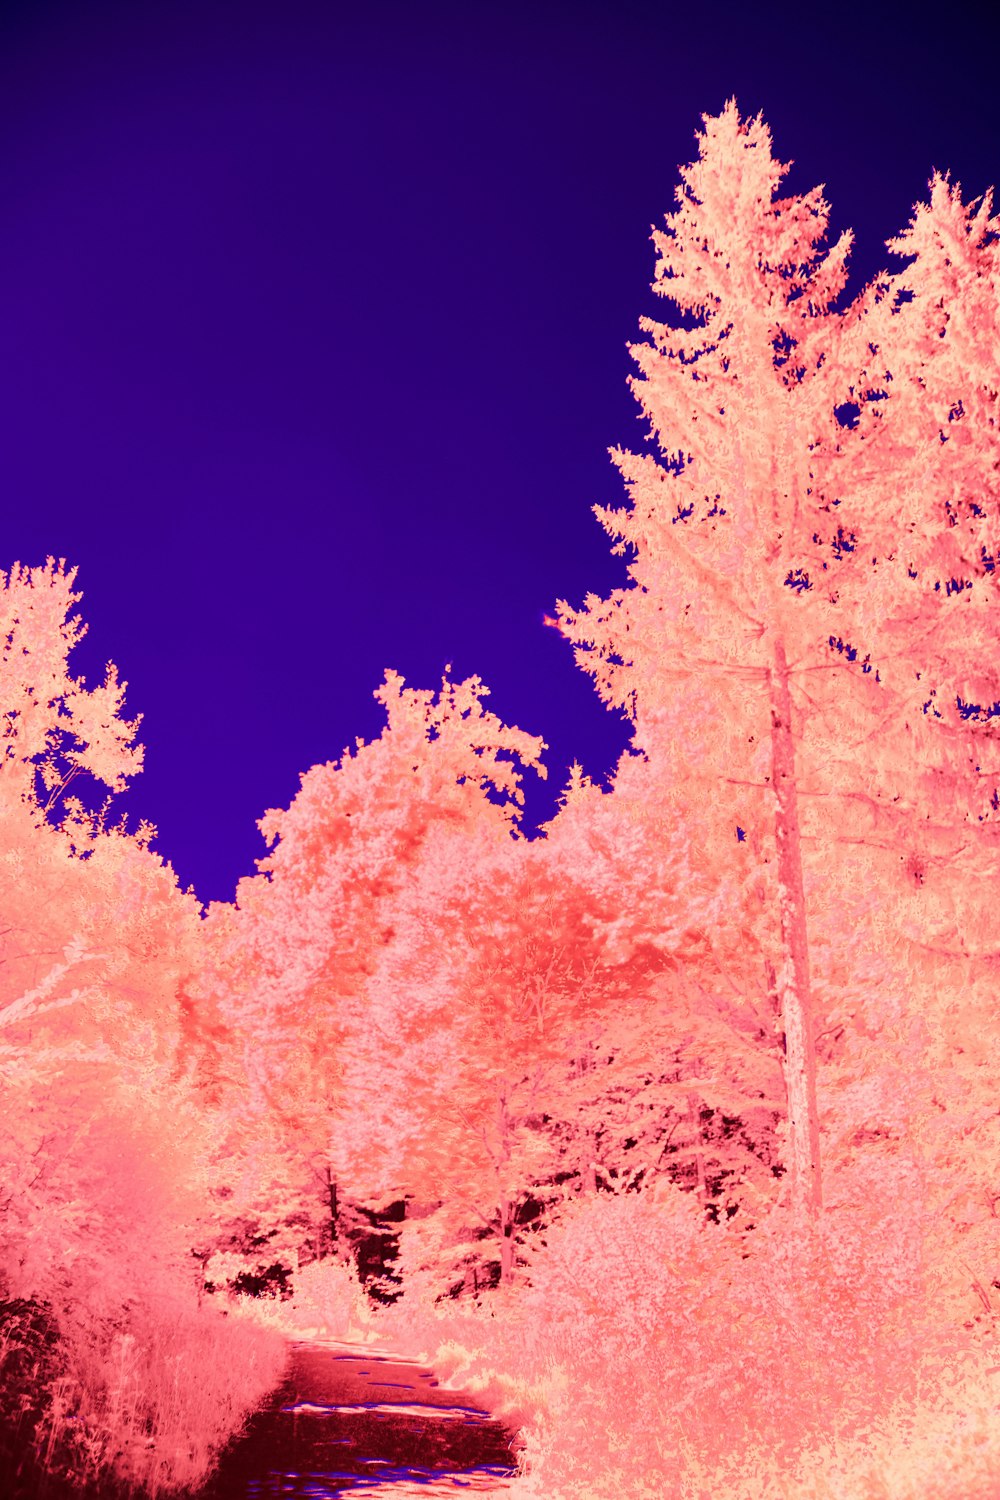 a infrared image of a road surrounded by trees